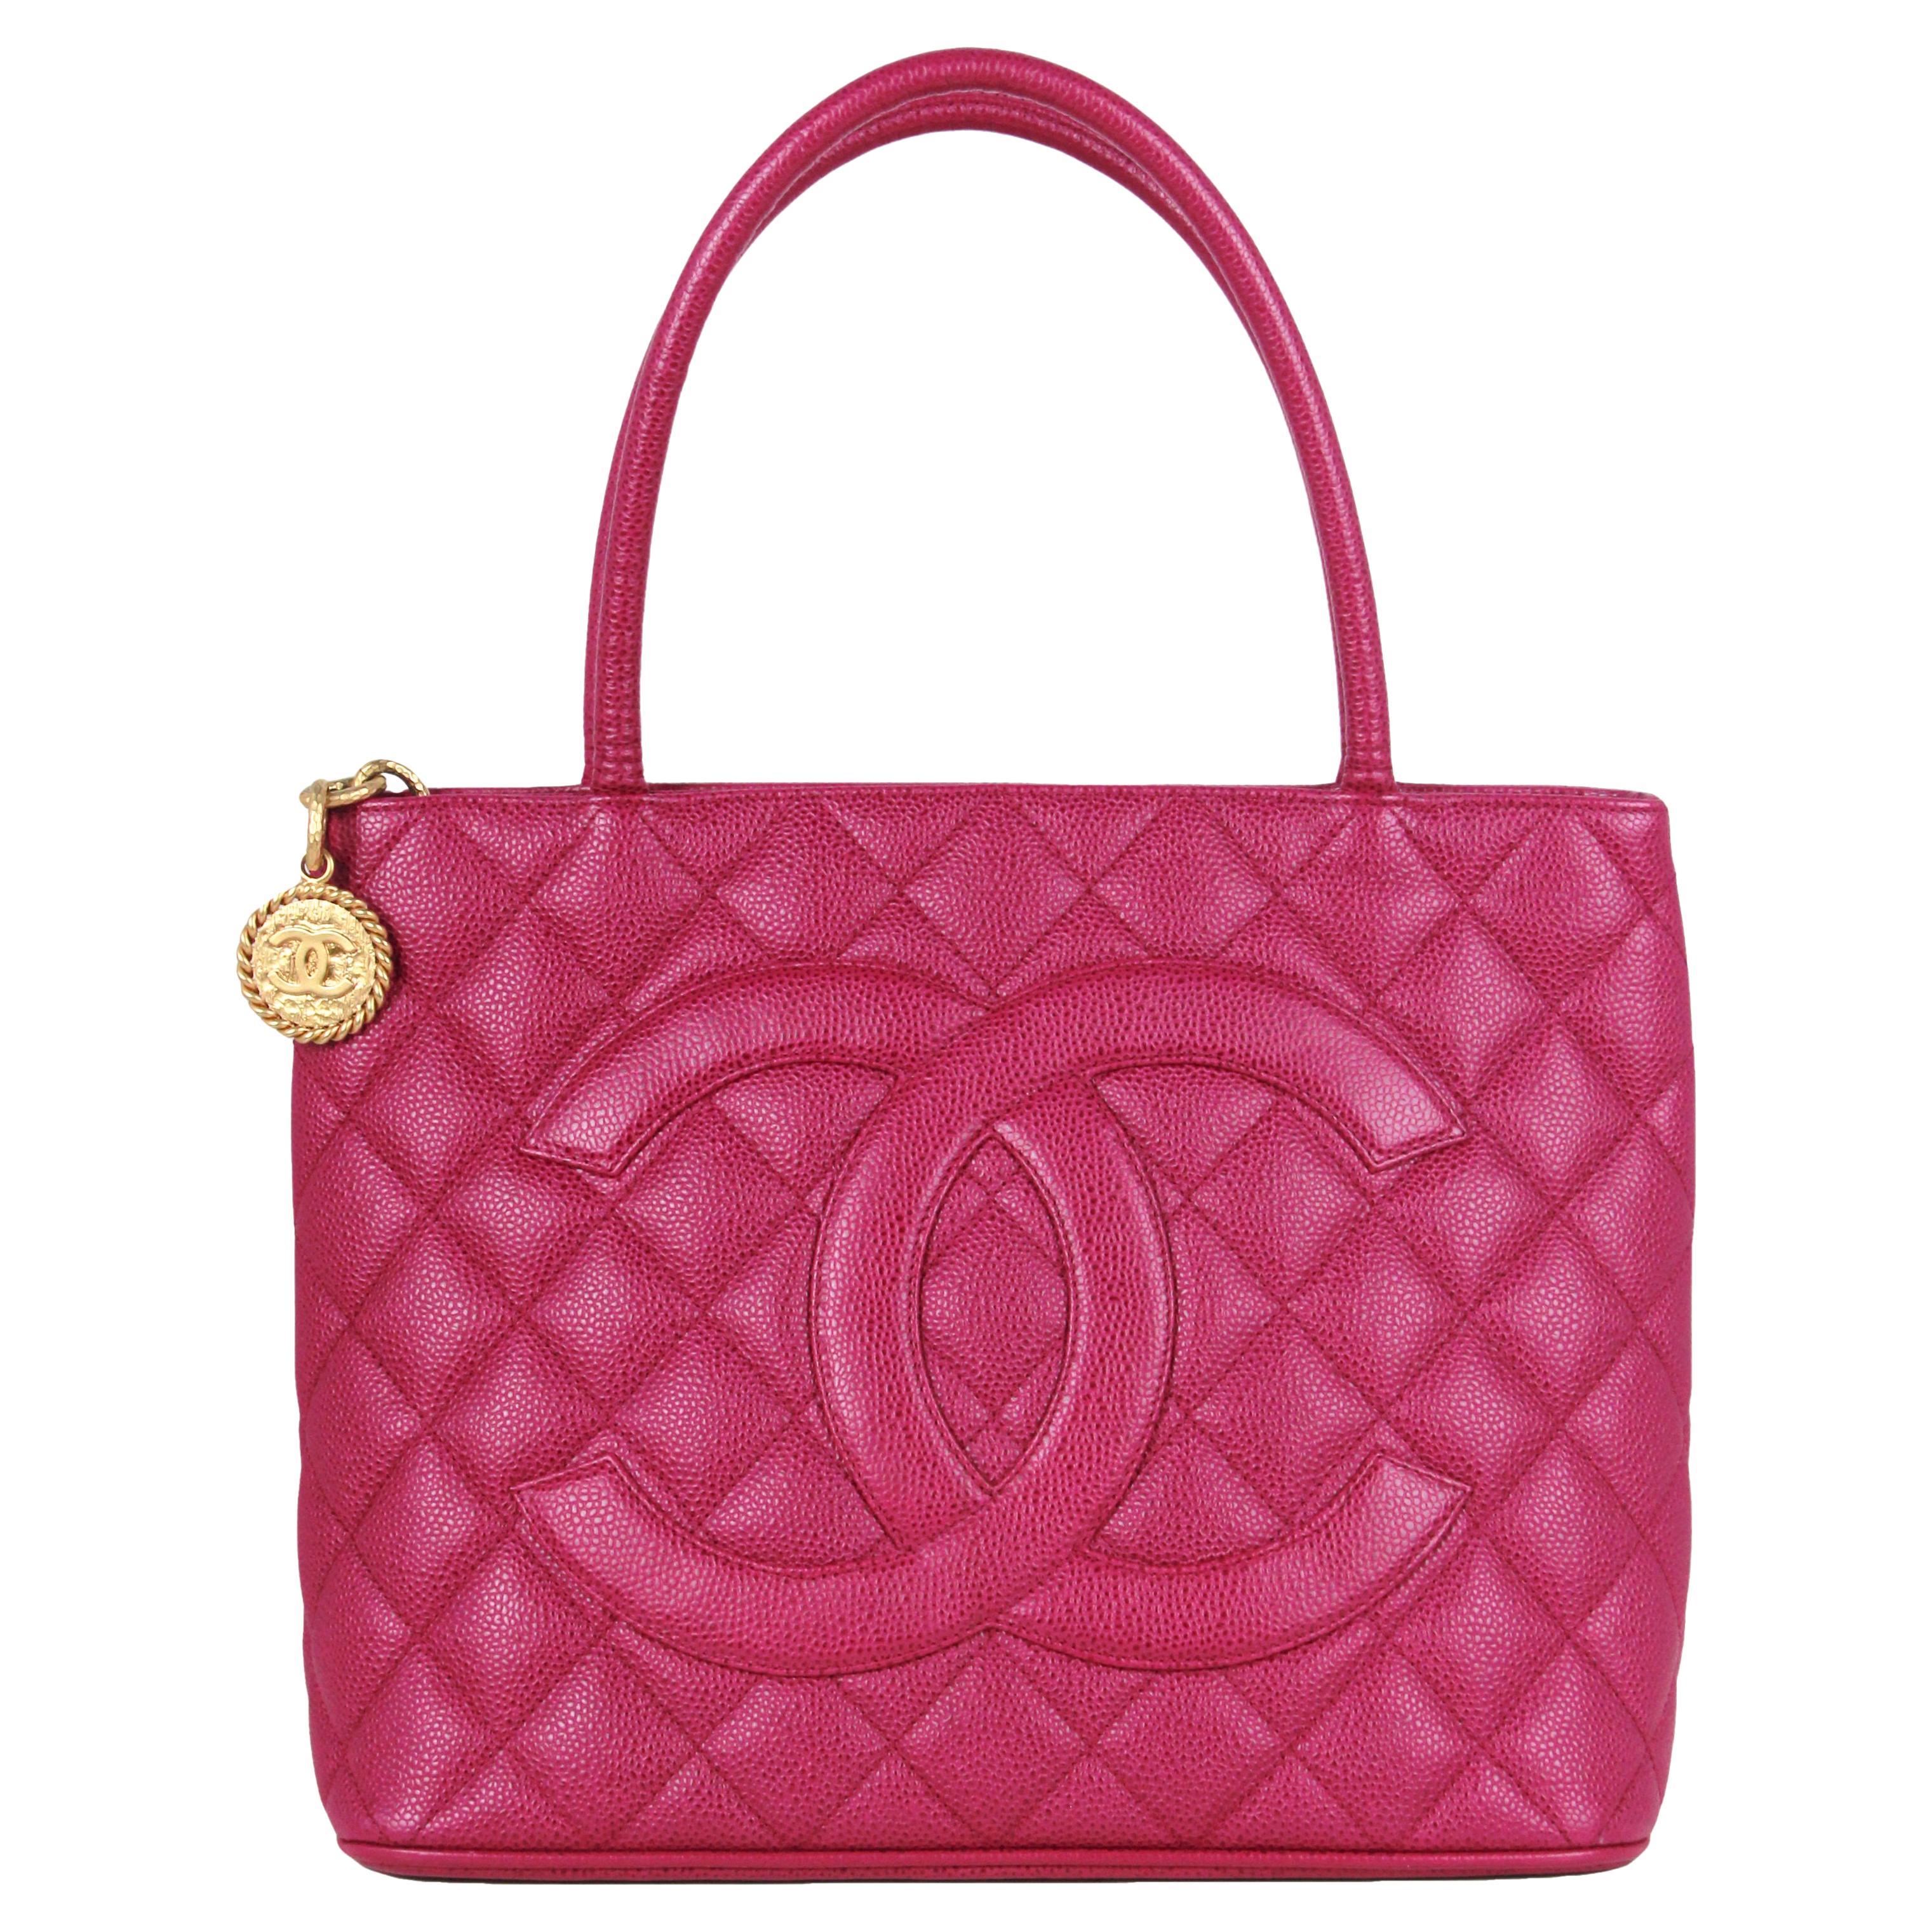 CHANEL Pre-Owned 2000 Medallion Tote Bag - Farfetch